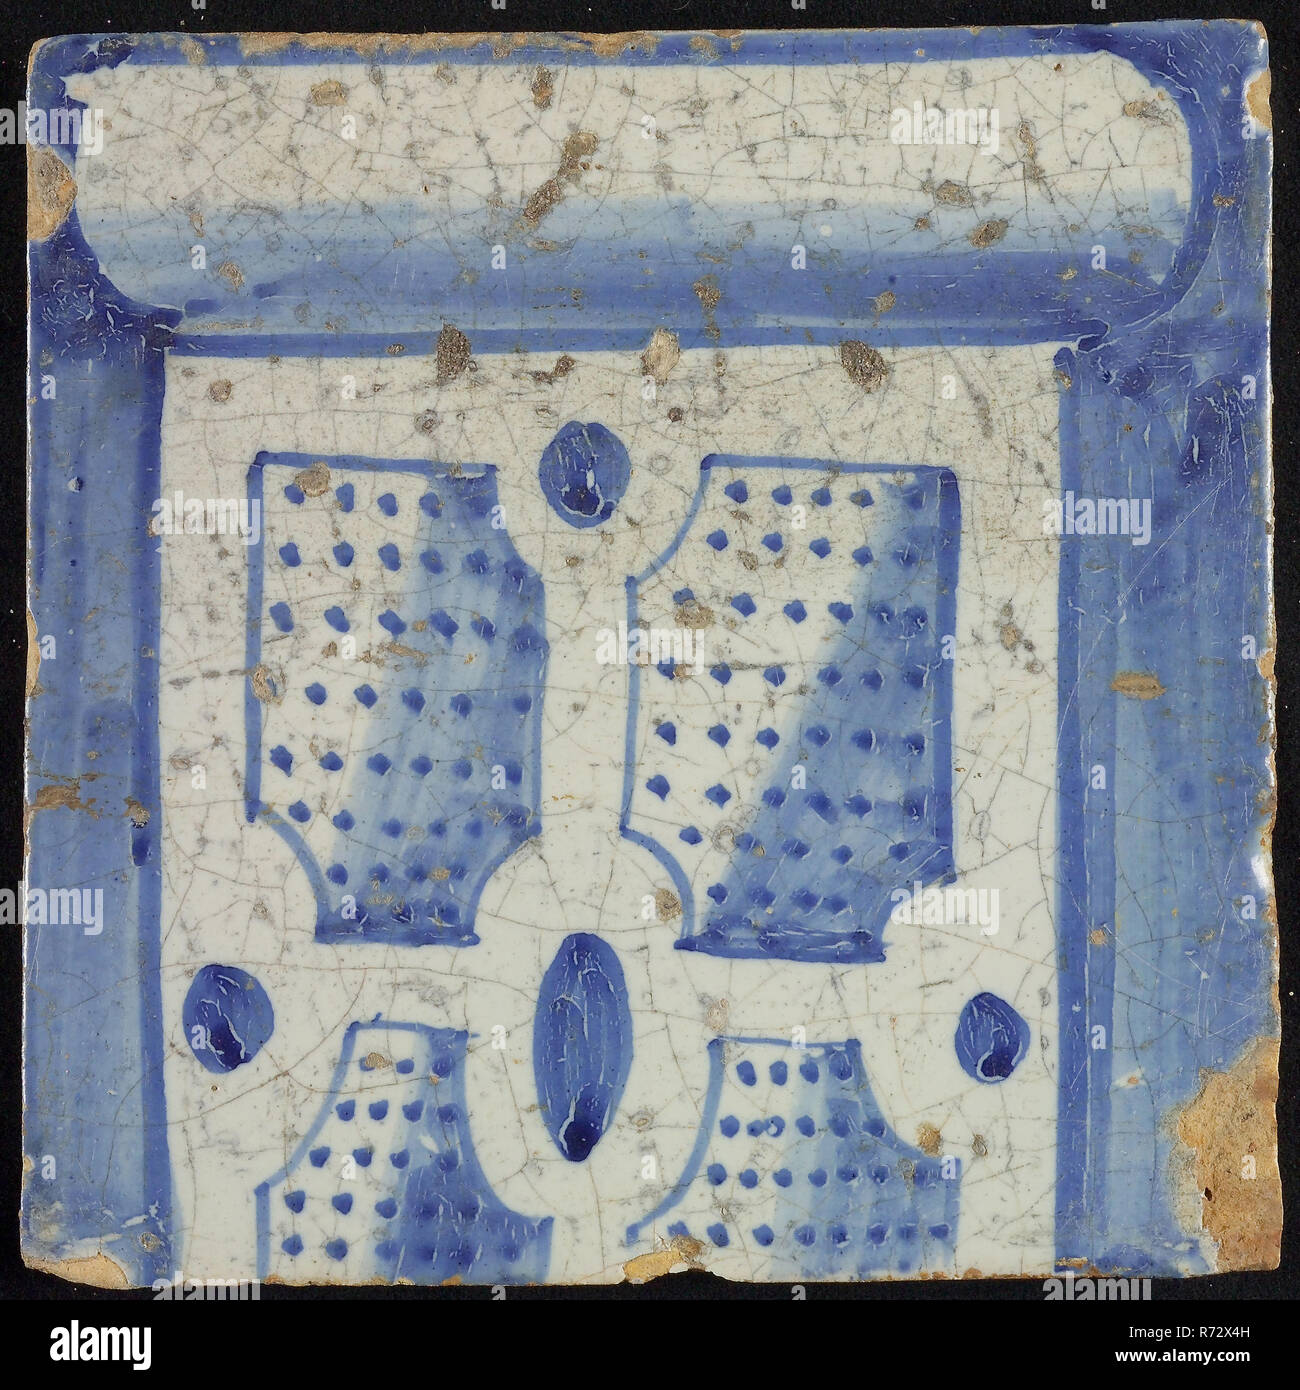 Tile of chimney pilaster, blue on white, bottom of column with basement, compartment with dots, chimney pilaster tile pilaster footage fragment ceramic earthenware glaze, baked 2x glazed painted Tile part of chimney pilaster originally twelve or thirteen high Yellow shard square two nail holes. Blue on white fond. Tile is part of single-row pilaster in Renaissance style and shows the underside of column with division with blue dots Shadow on the right On center square: G 1914 construction city hall Zandstraat-quarters Second World War war bombardment Rotterdam City Center Stadsdriehoek 1940 re Stock Photo